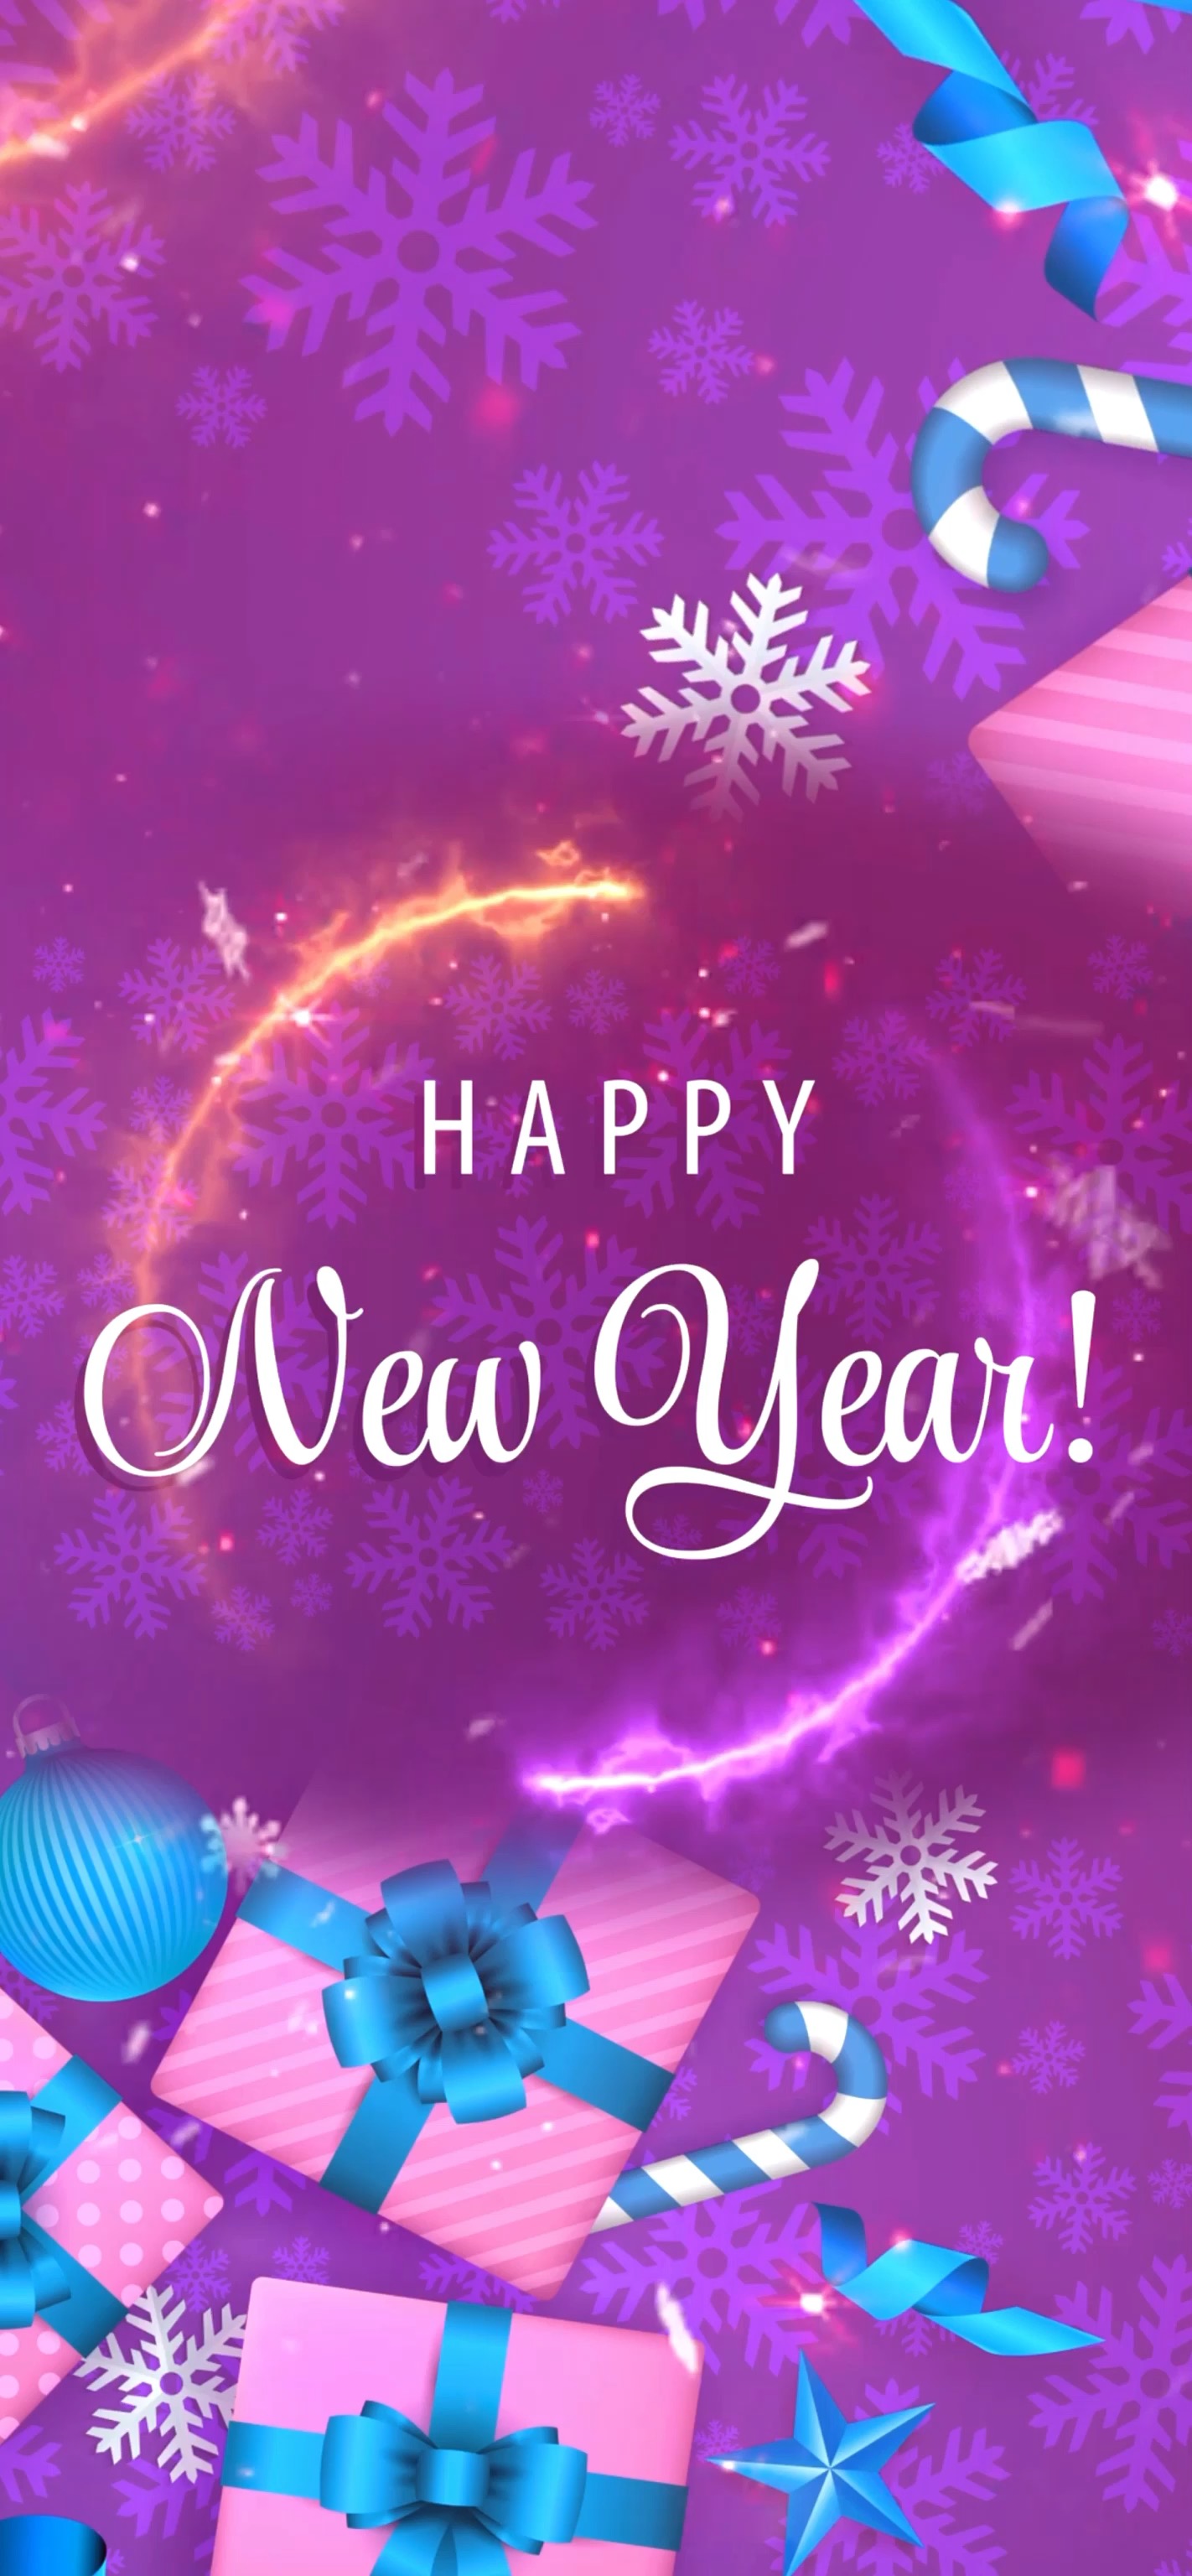 Happy New Year 2021 | LIVE Wallpaper - Wallpapers Central